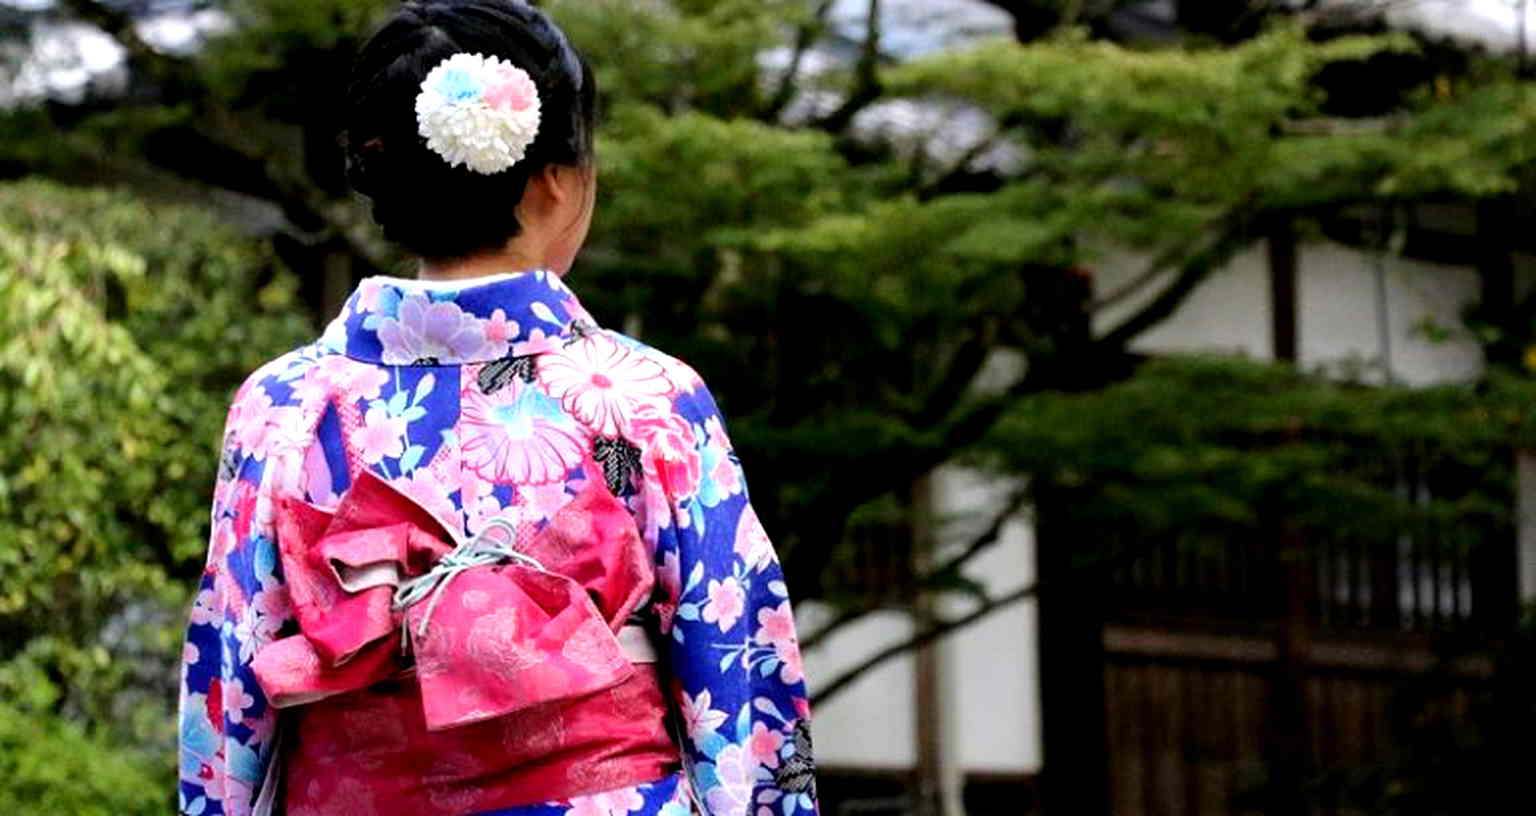 Woman called ‘scum of society’ for trying to enter tourist site in China while wearing a kimono